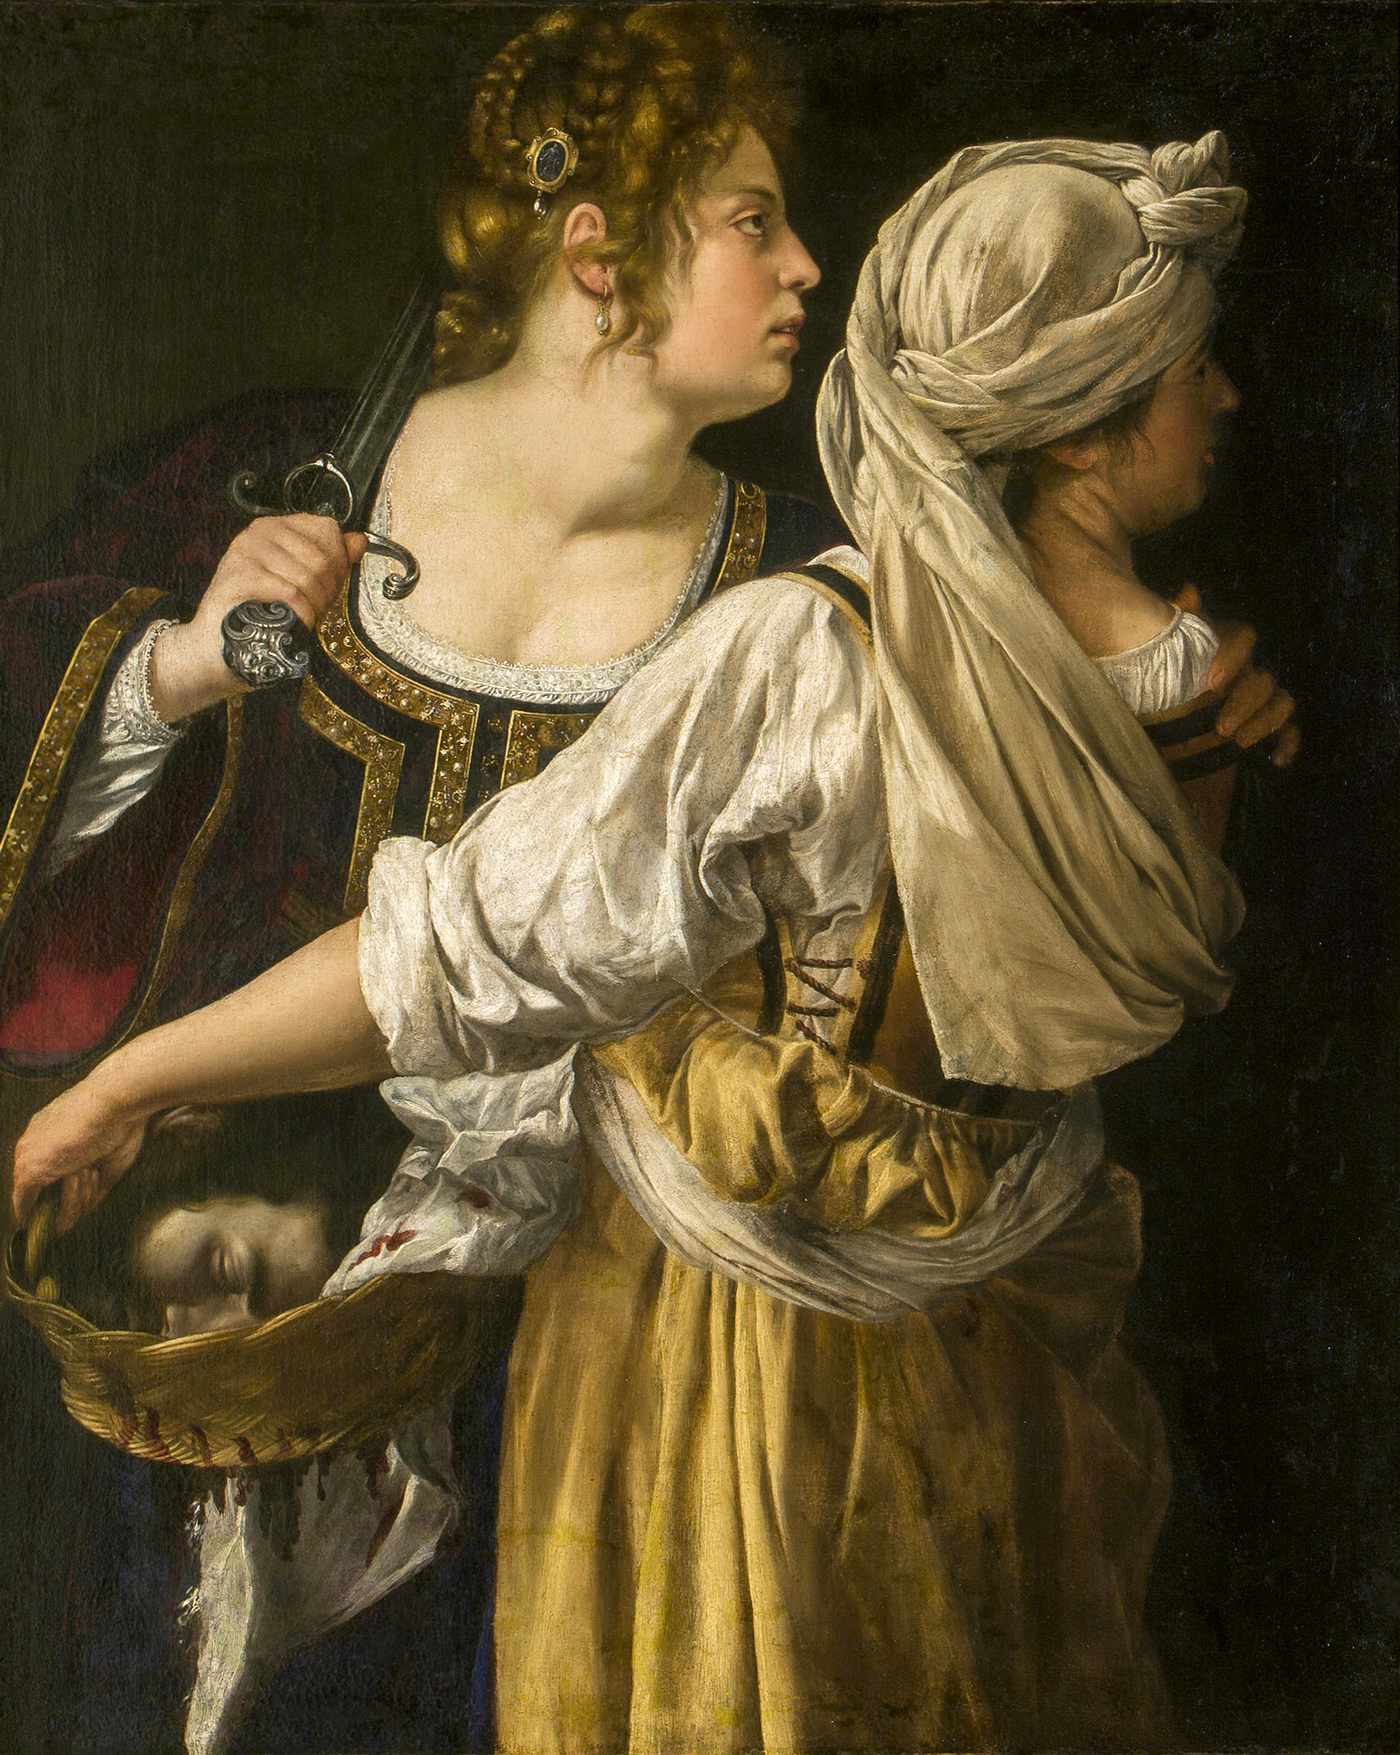 Two women look off past the right edge of the canvas. They appear in half-length, and one woman faces us, holding a sword over her shoulder. She grips the shoulder of the other woman with her left hand. That woman wears a yellow dress and white head covering has her back to us and holds a basket to the side. Inside the basket is the bloodied head of a man. 